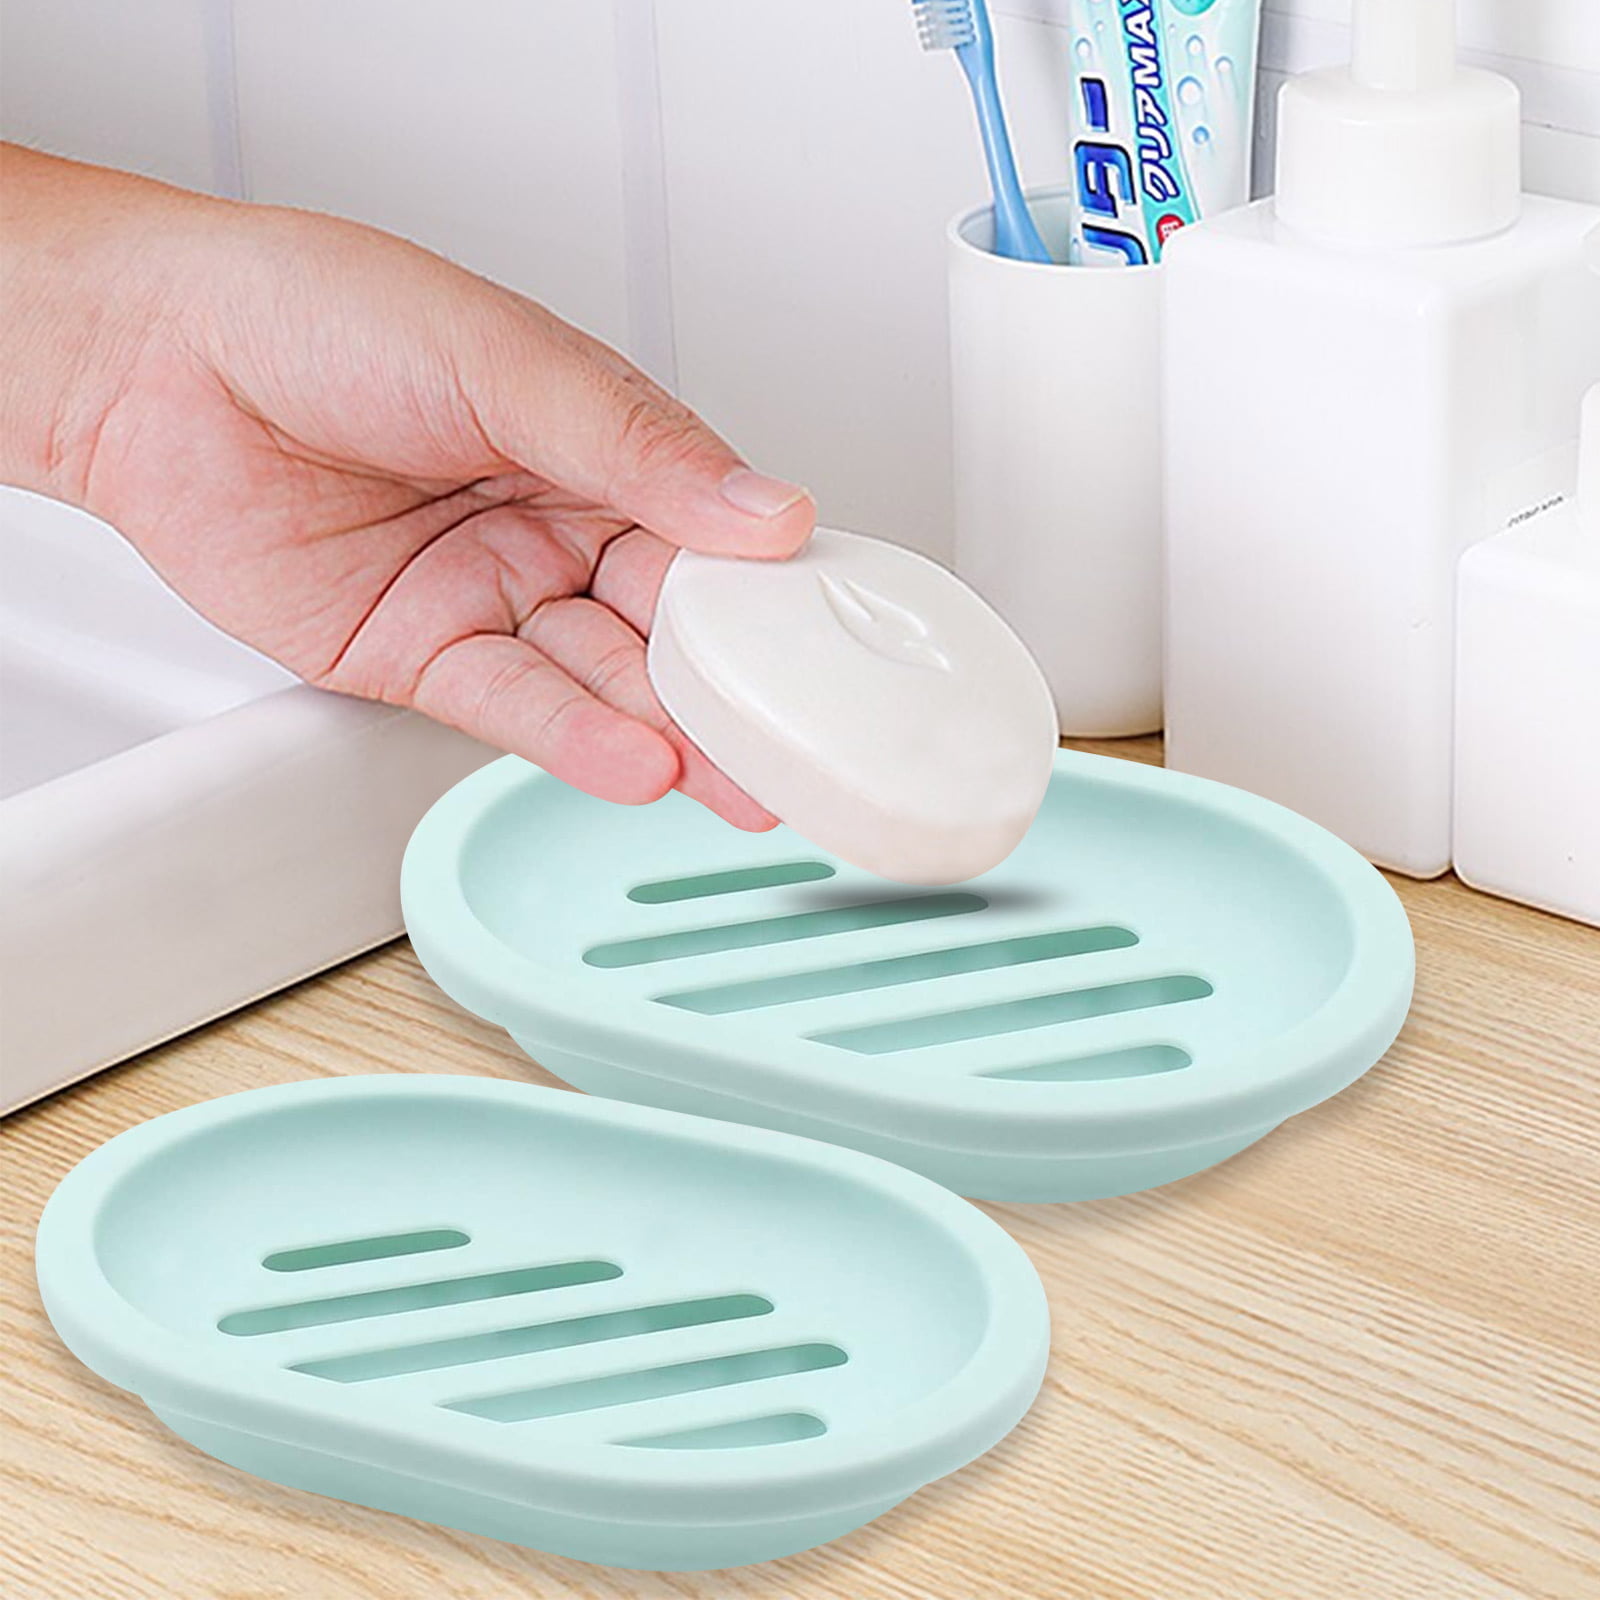 Soap Holder,Soap Saver Easy Cleaning 2-Pack Soap Holder Dish with Drain Dry,